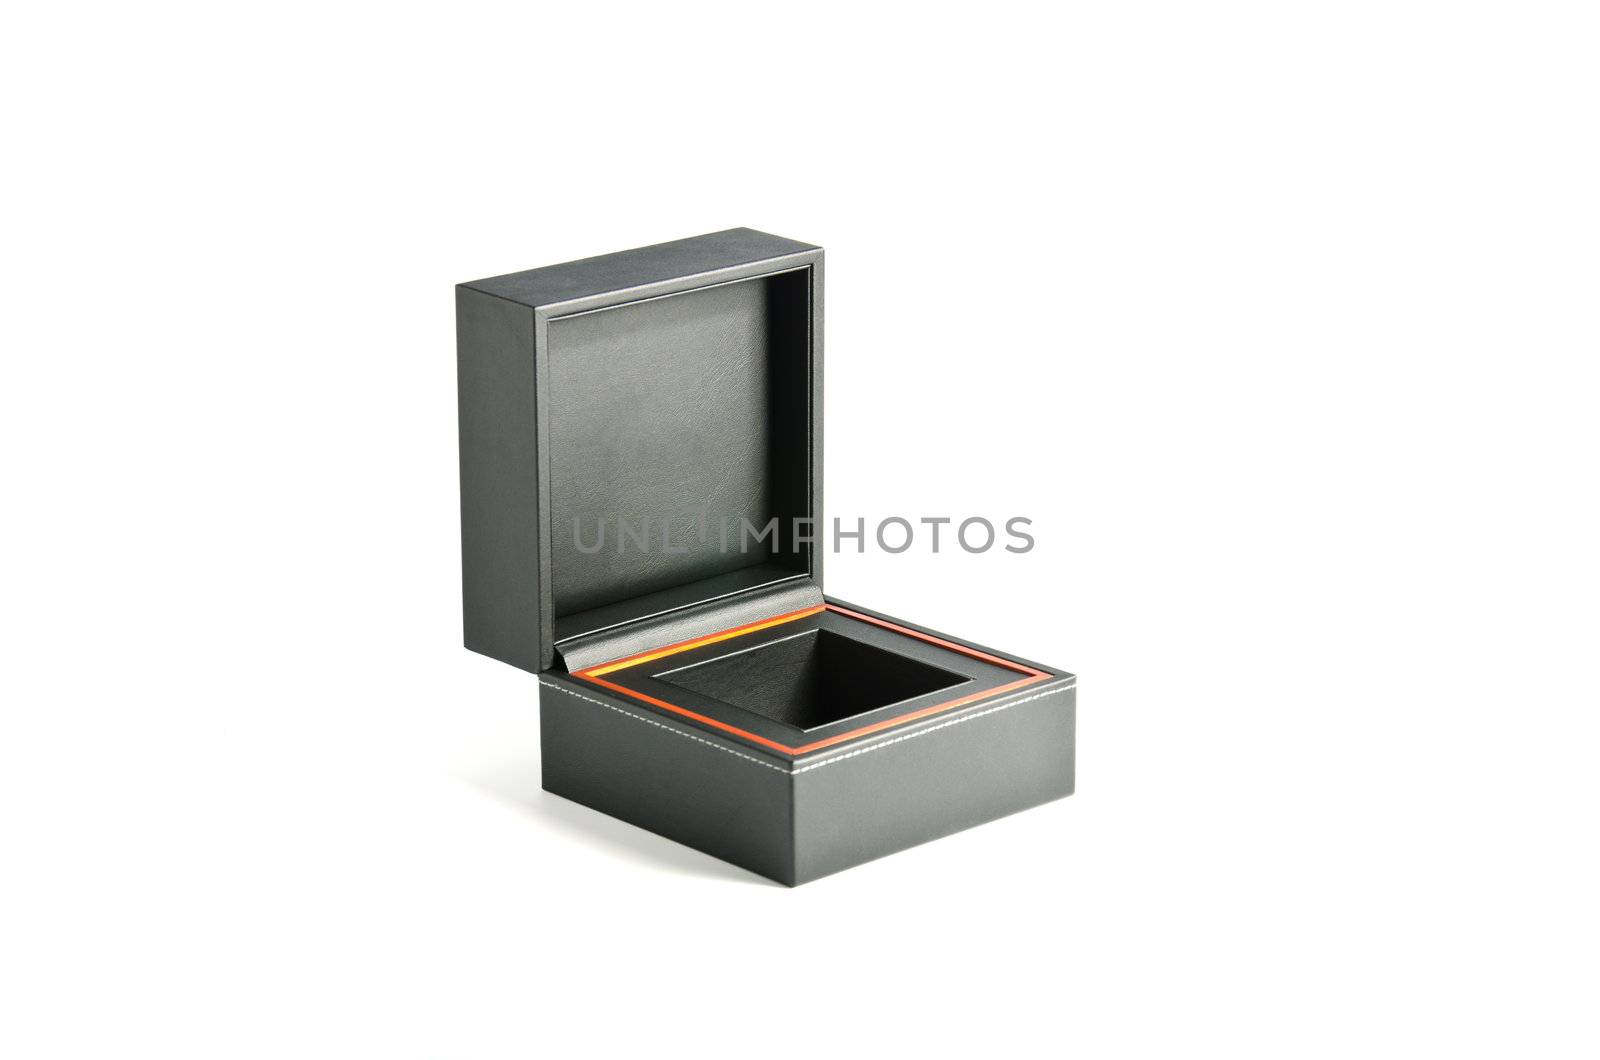 Box pad with black leather on white background